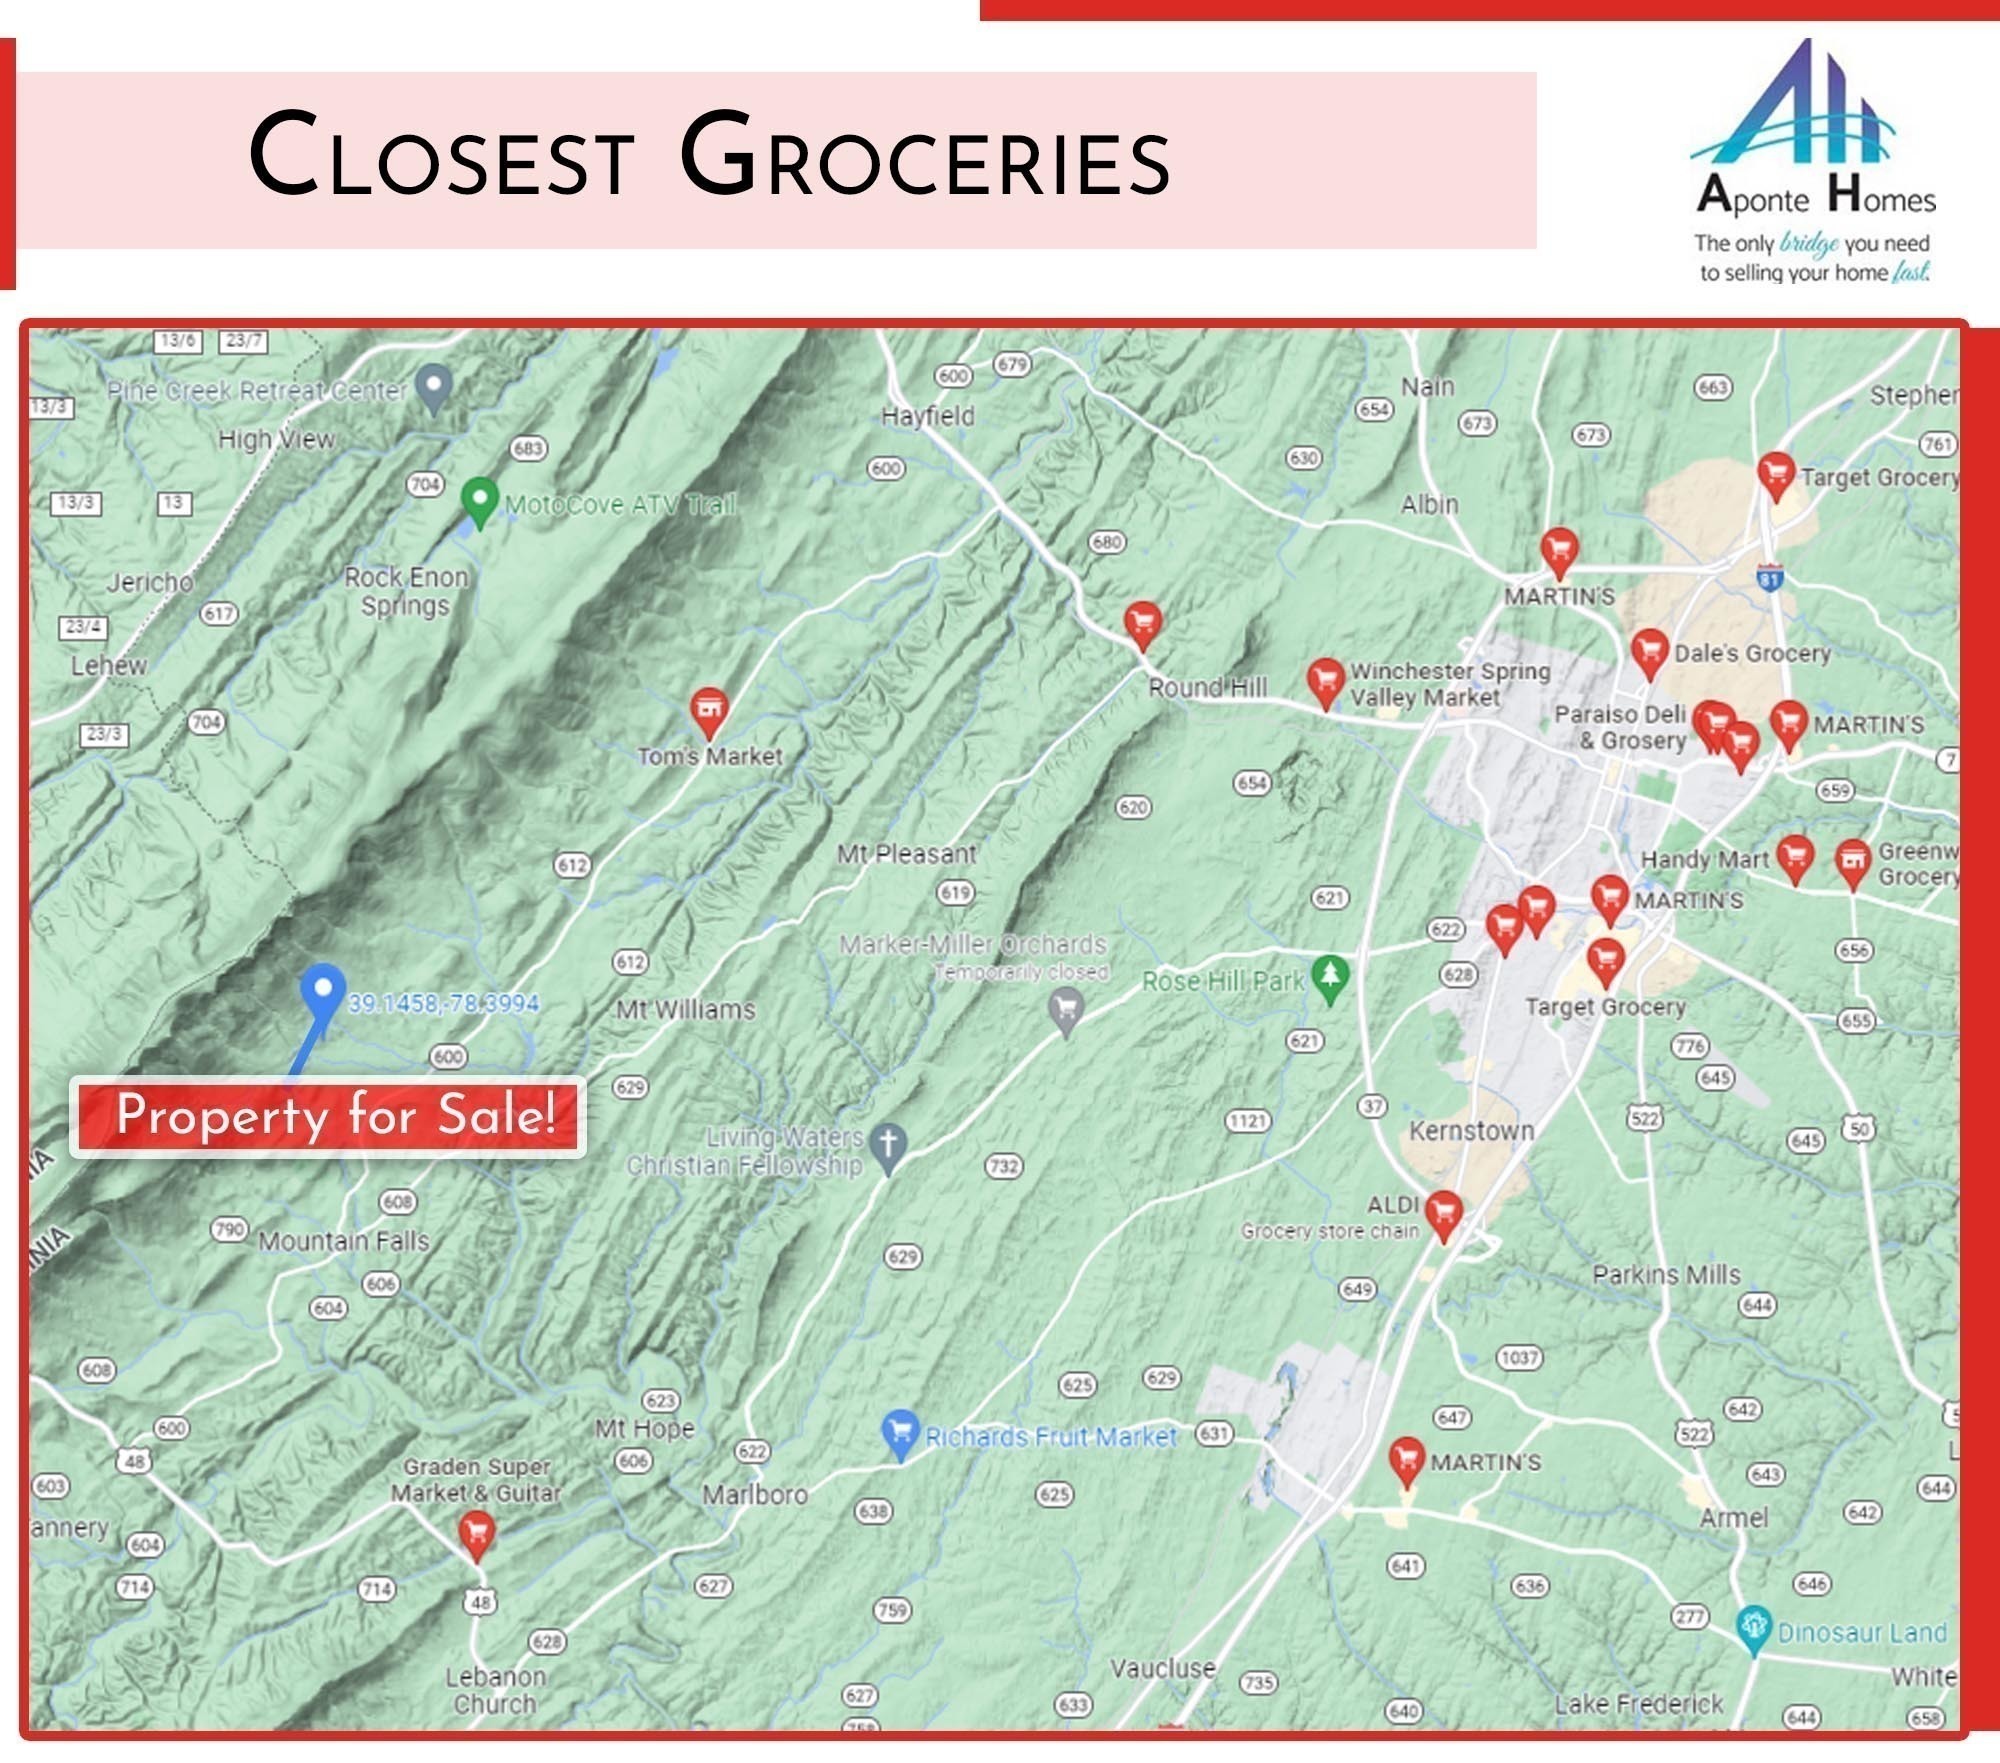 Closest Groceries